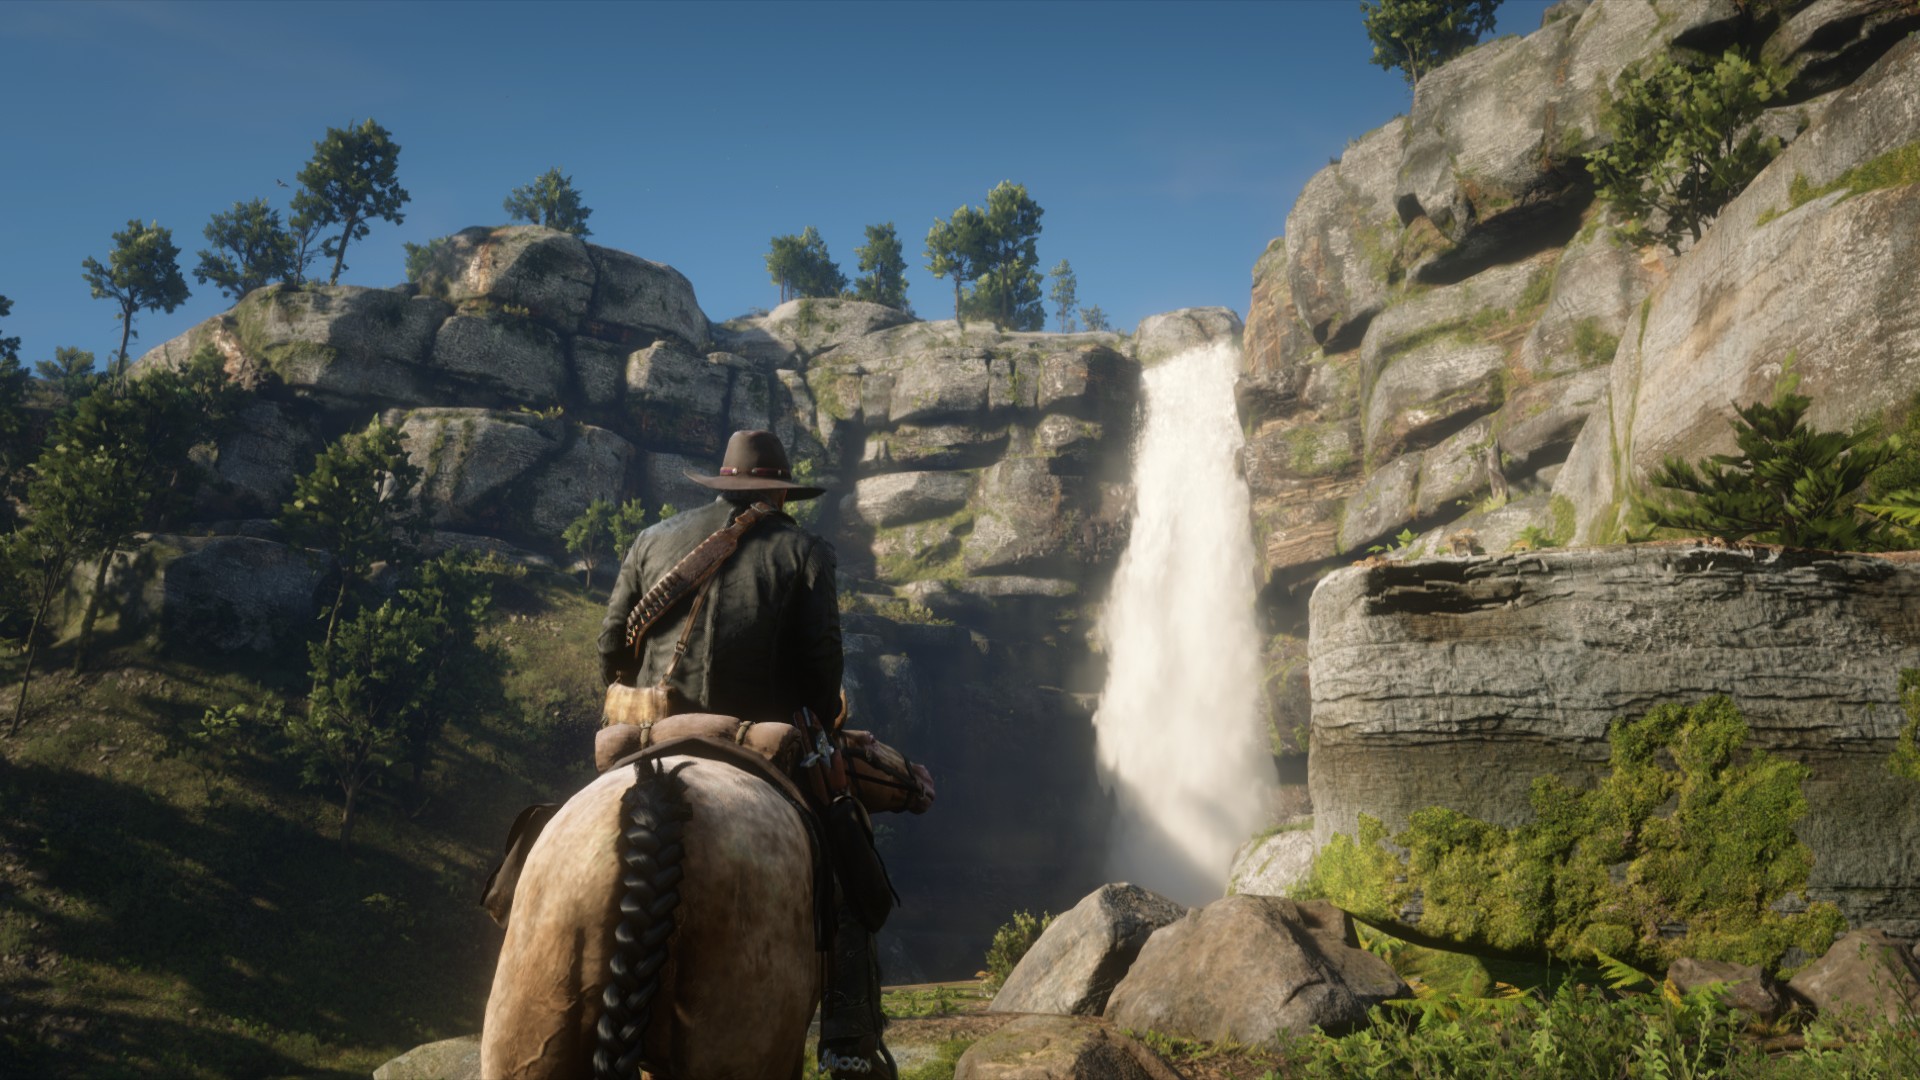 Red Dead Redemption 2 (PC) Review - Marooners' Rock